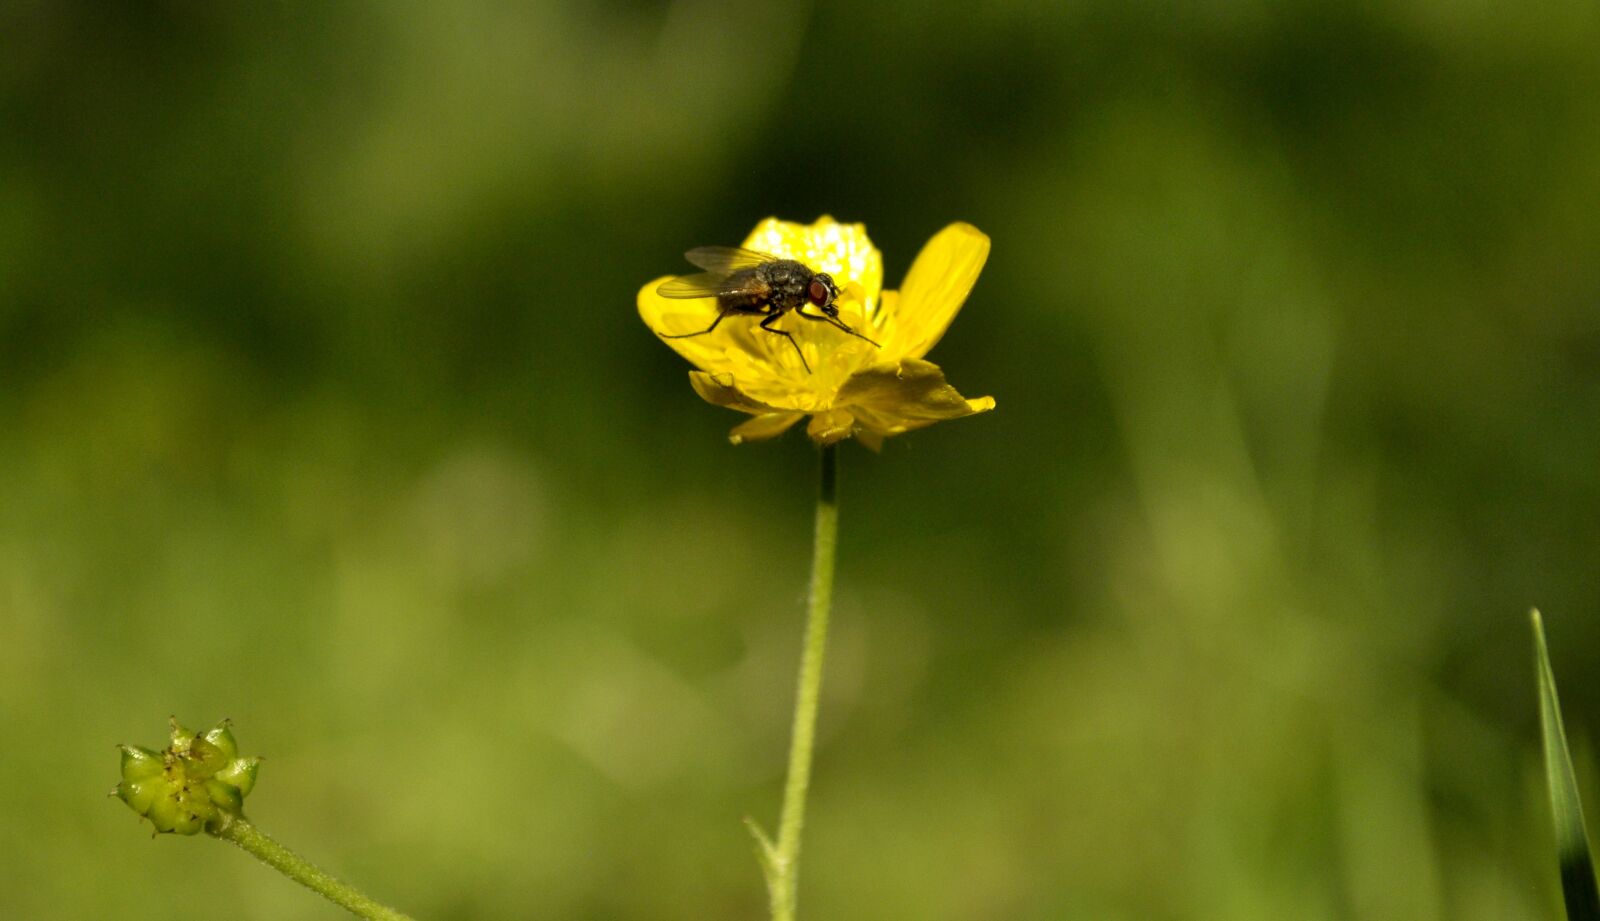 Nikon D90 sample photo. Flower, fly, insect photography